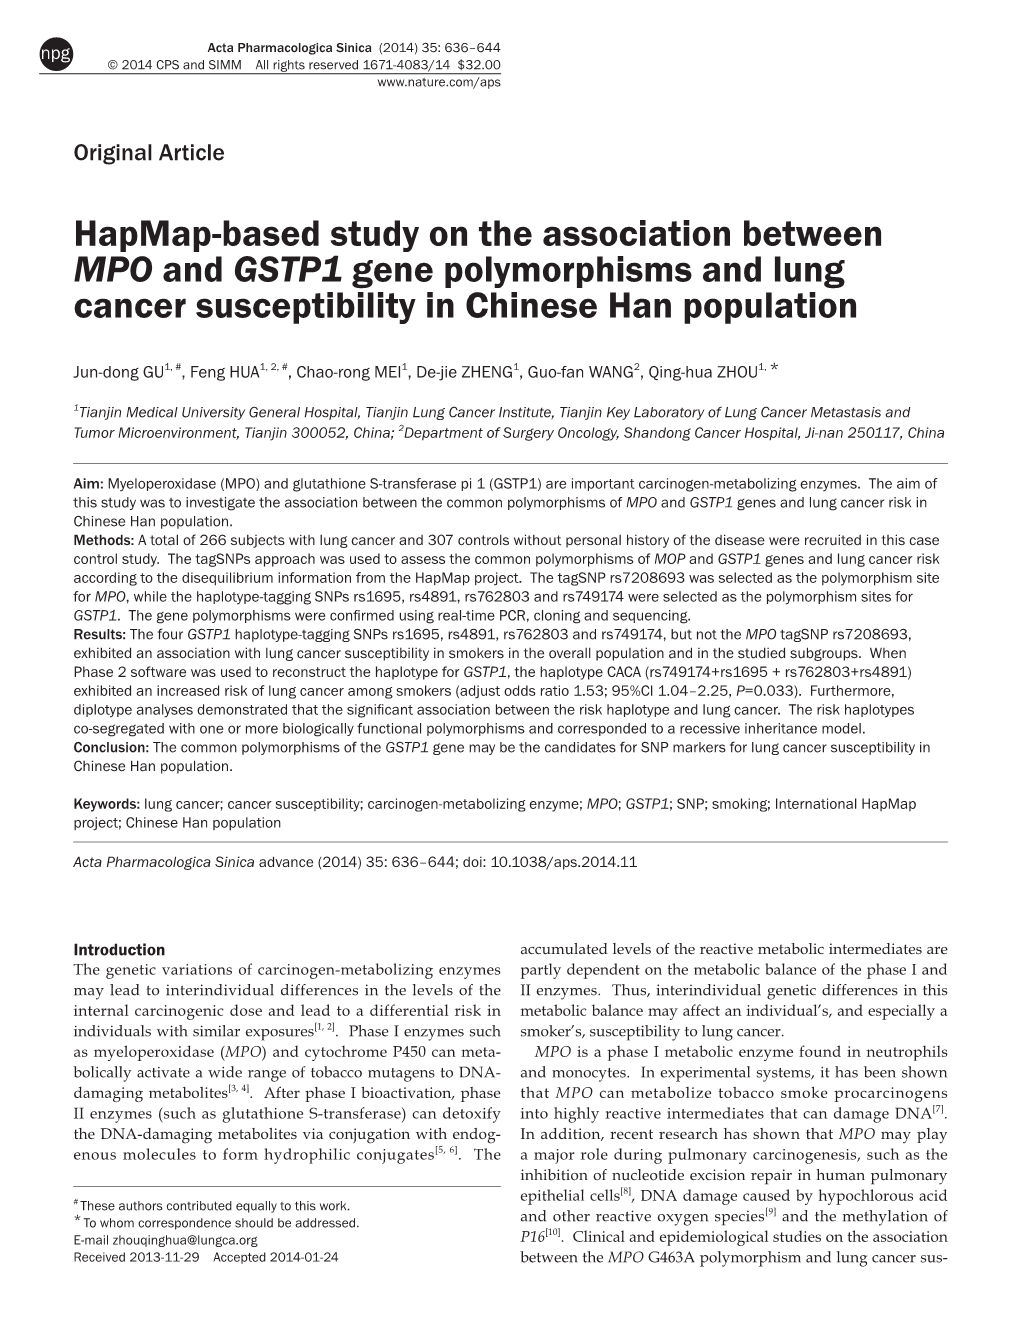 Hapmap-Based Study on the Association Between MPO and GSTP1 Gene Polymorphisms and Lung Cancer Susceptibility in Chinese Han Population